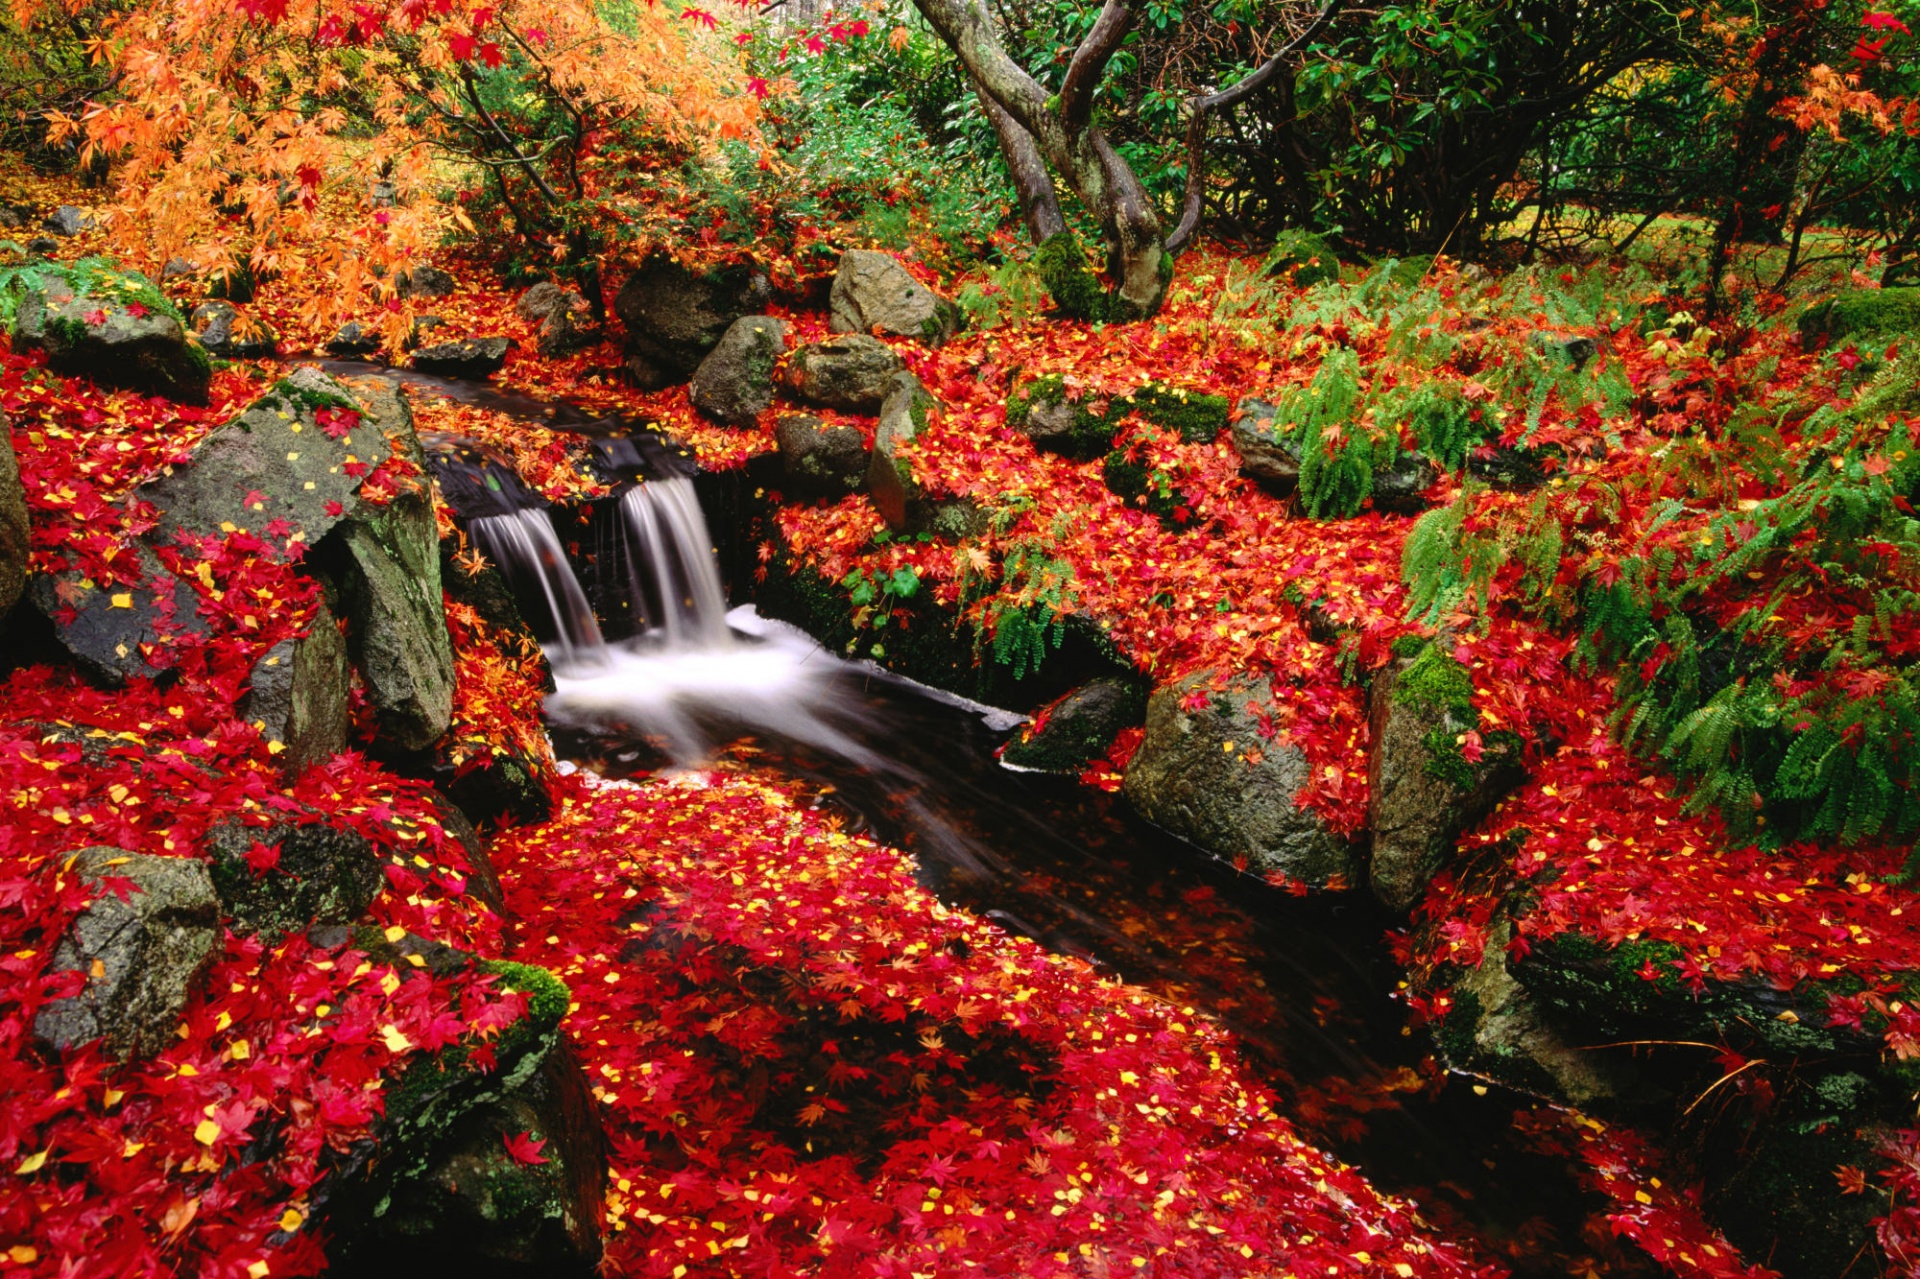 Waterfall cascading through lush moss-covered vegetation with colorful autumn leaves in Canada.